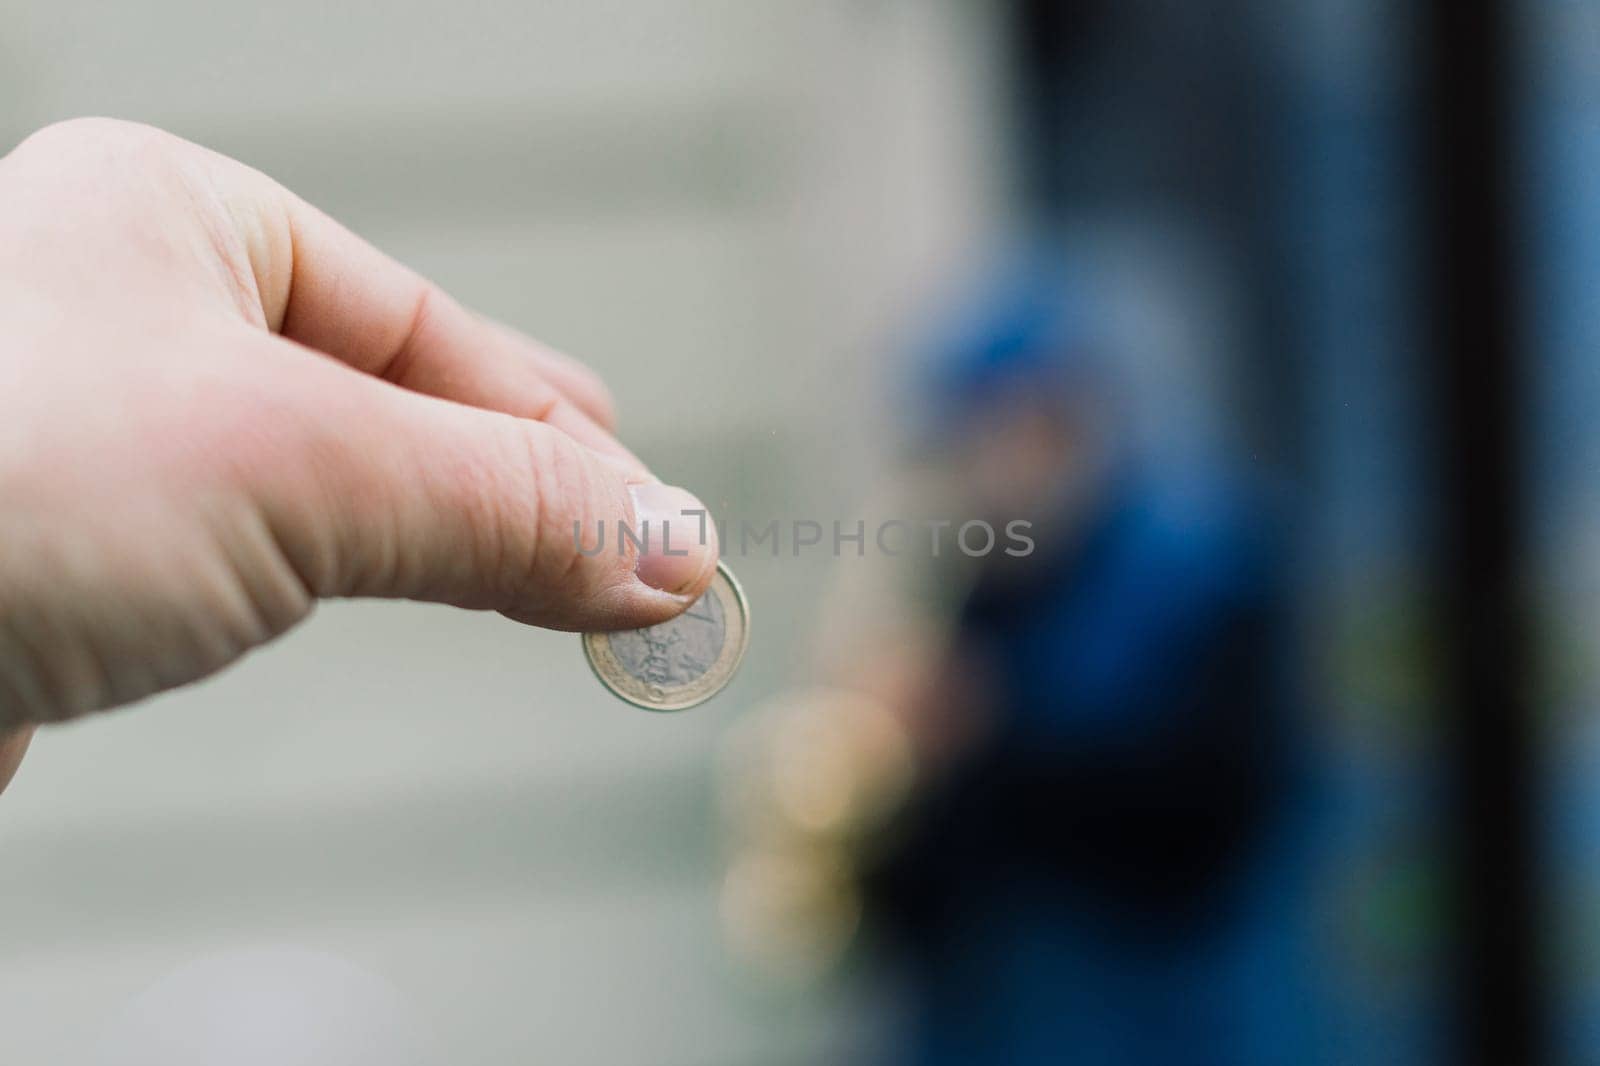 Street old performer musician plays saxofon blurred, coin in hand focused by Zelenin